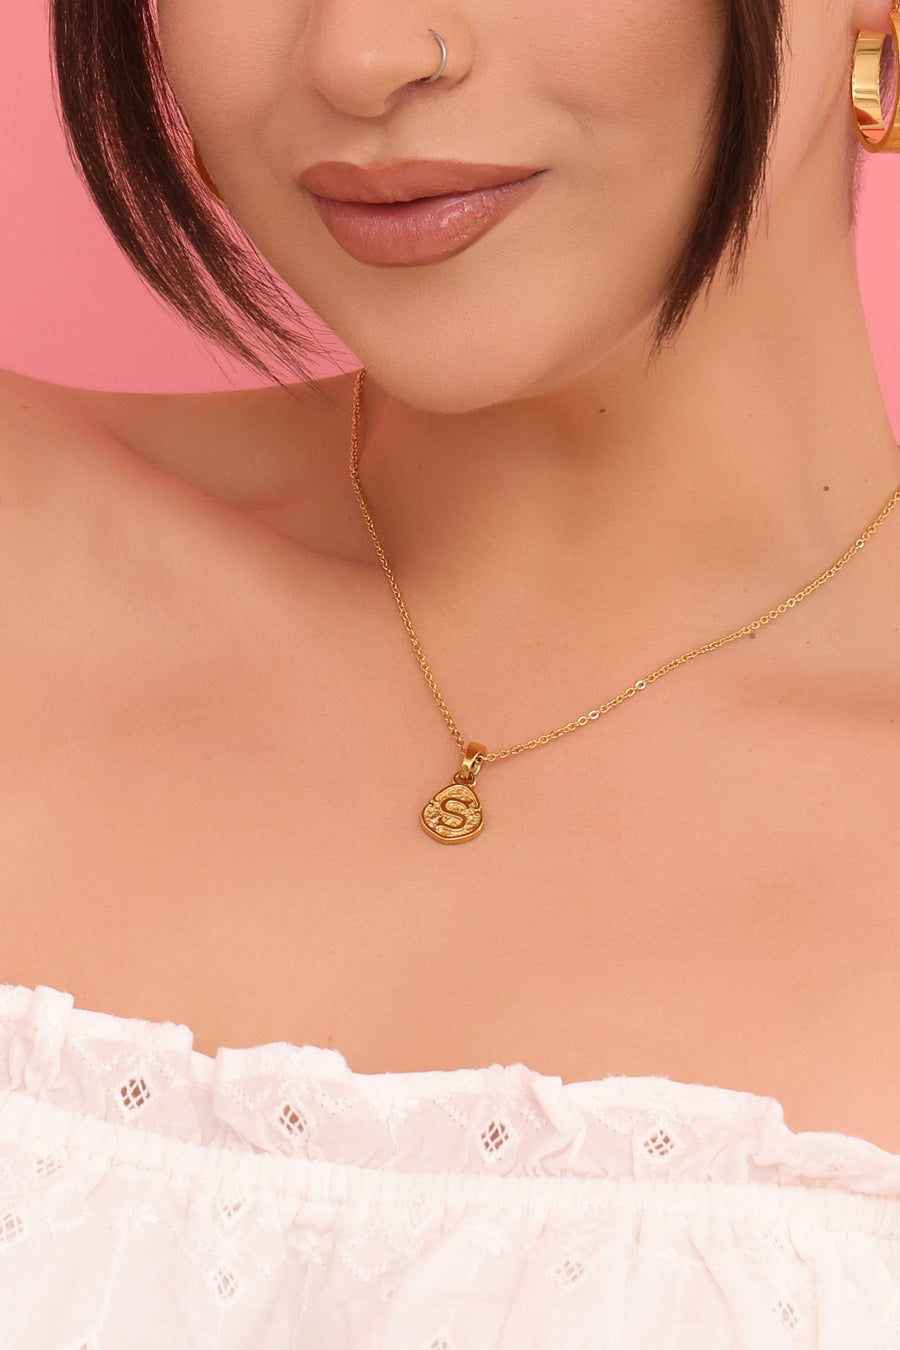 "G" Tberfil Letter Pendant with Petite Adjustable Chain Necklace